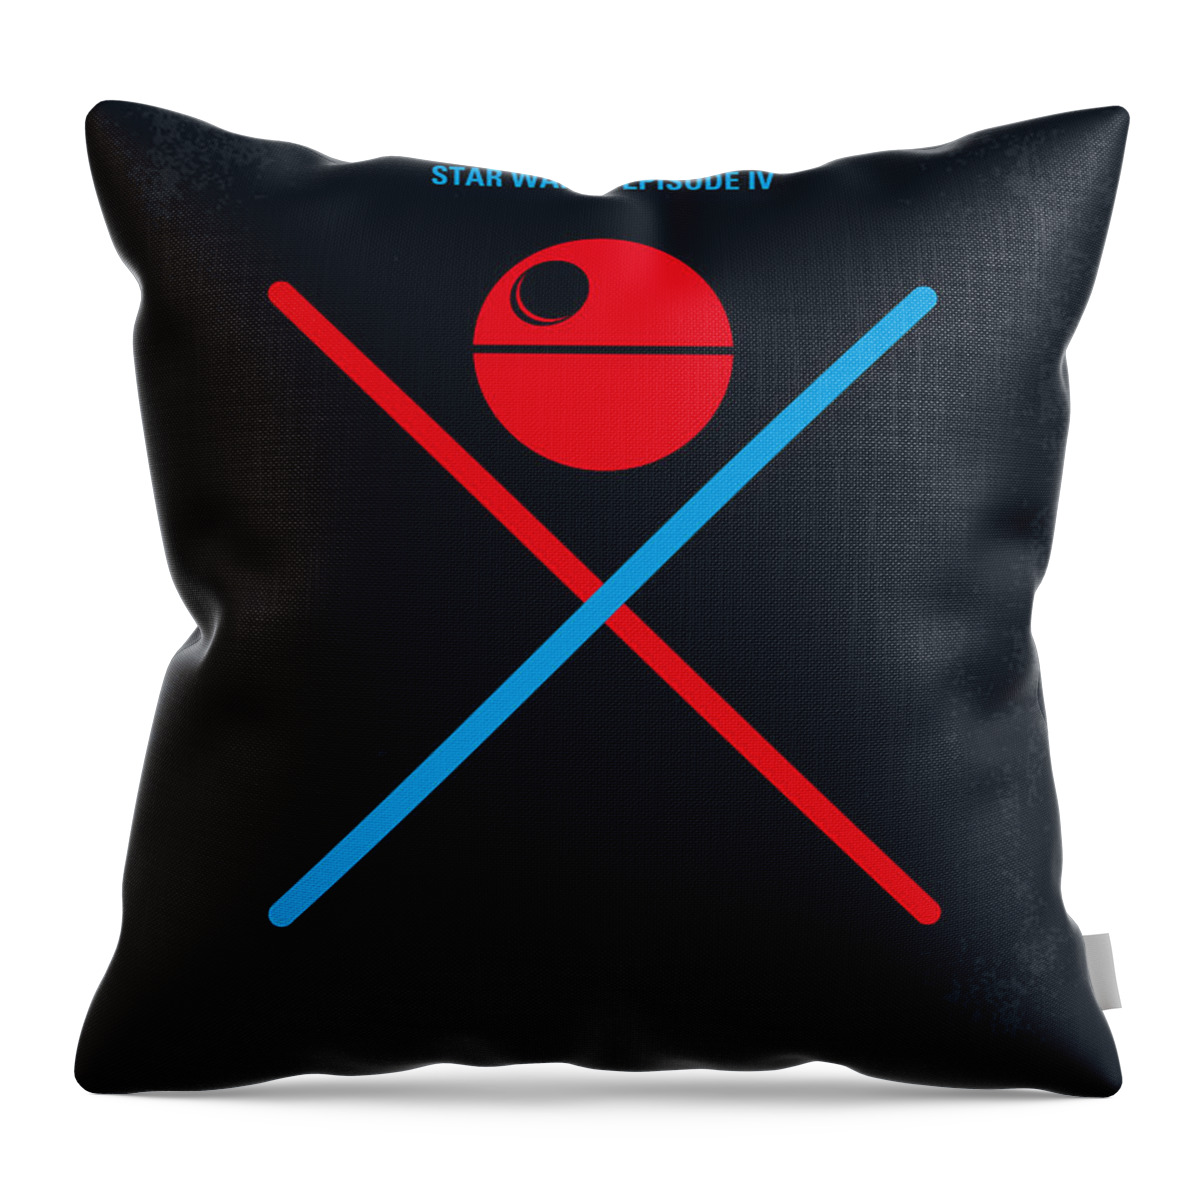 Star Wars Episode Iv A New Hope Throw Pillow featuring the digital art No154 My STAR WARS Episode IV A New Hope minimal movie poster by Chungkong Art